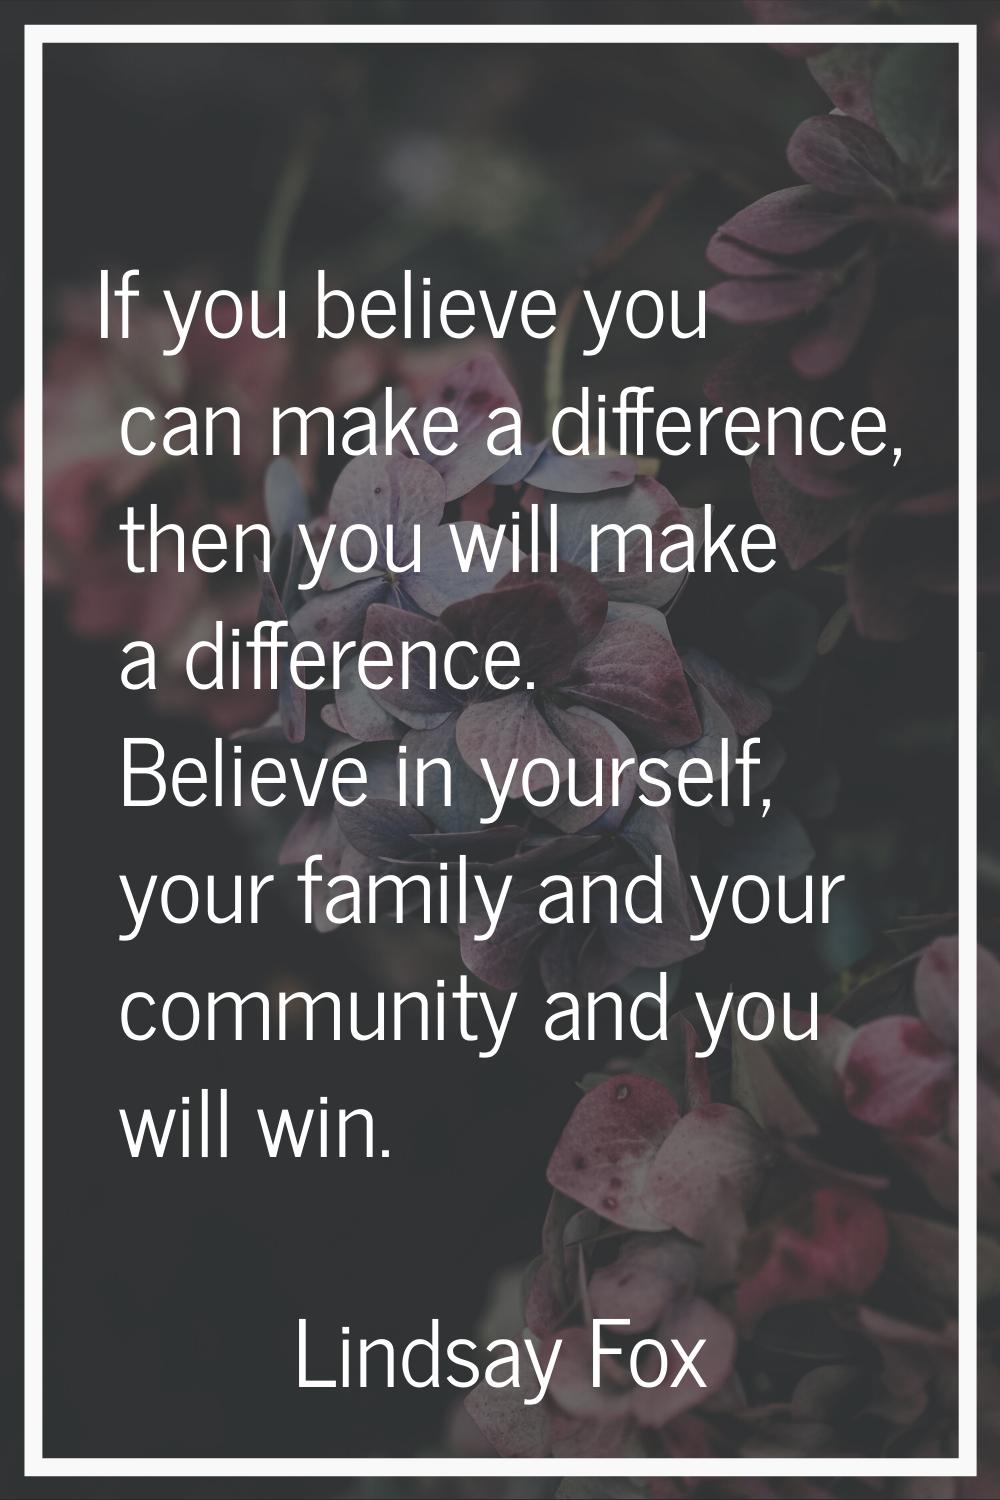 If you believe you can make a difference, then you will make a difference. Believe in yourself, you